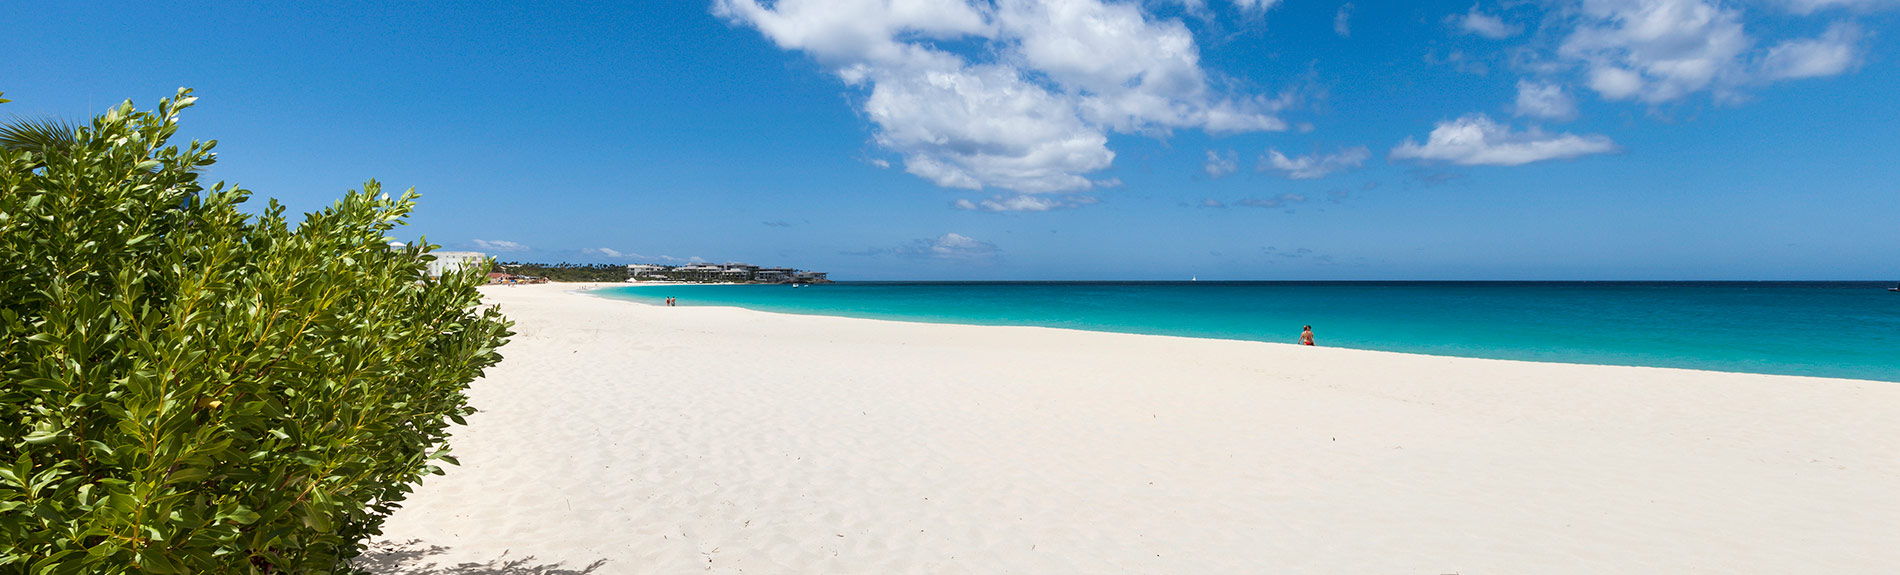 Gorgeous Meads Bay, Anguilla